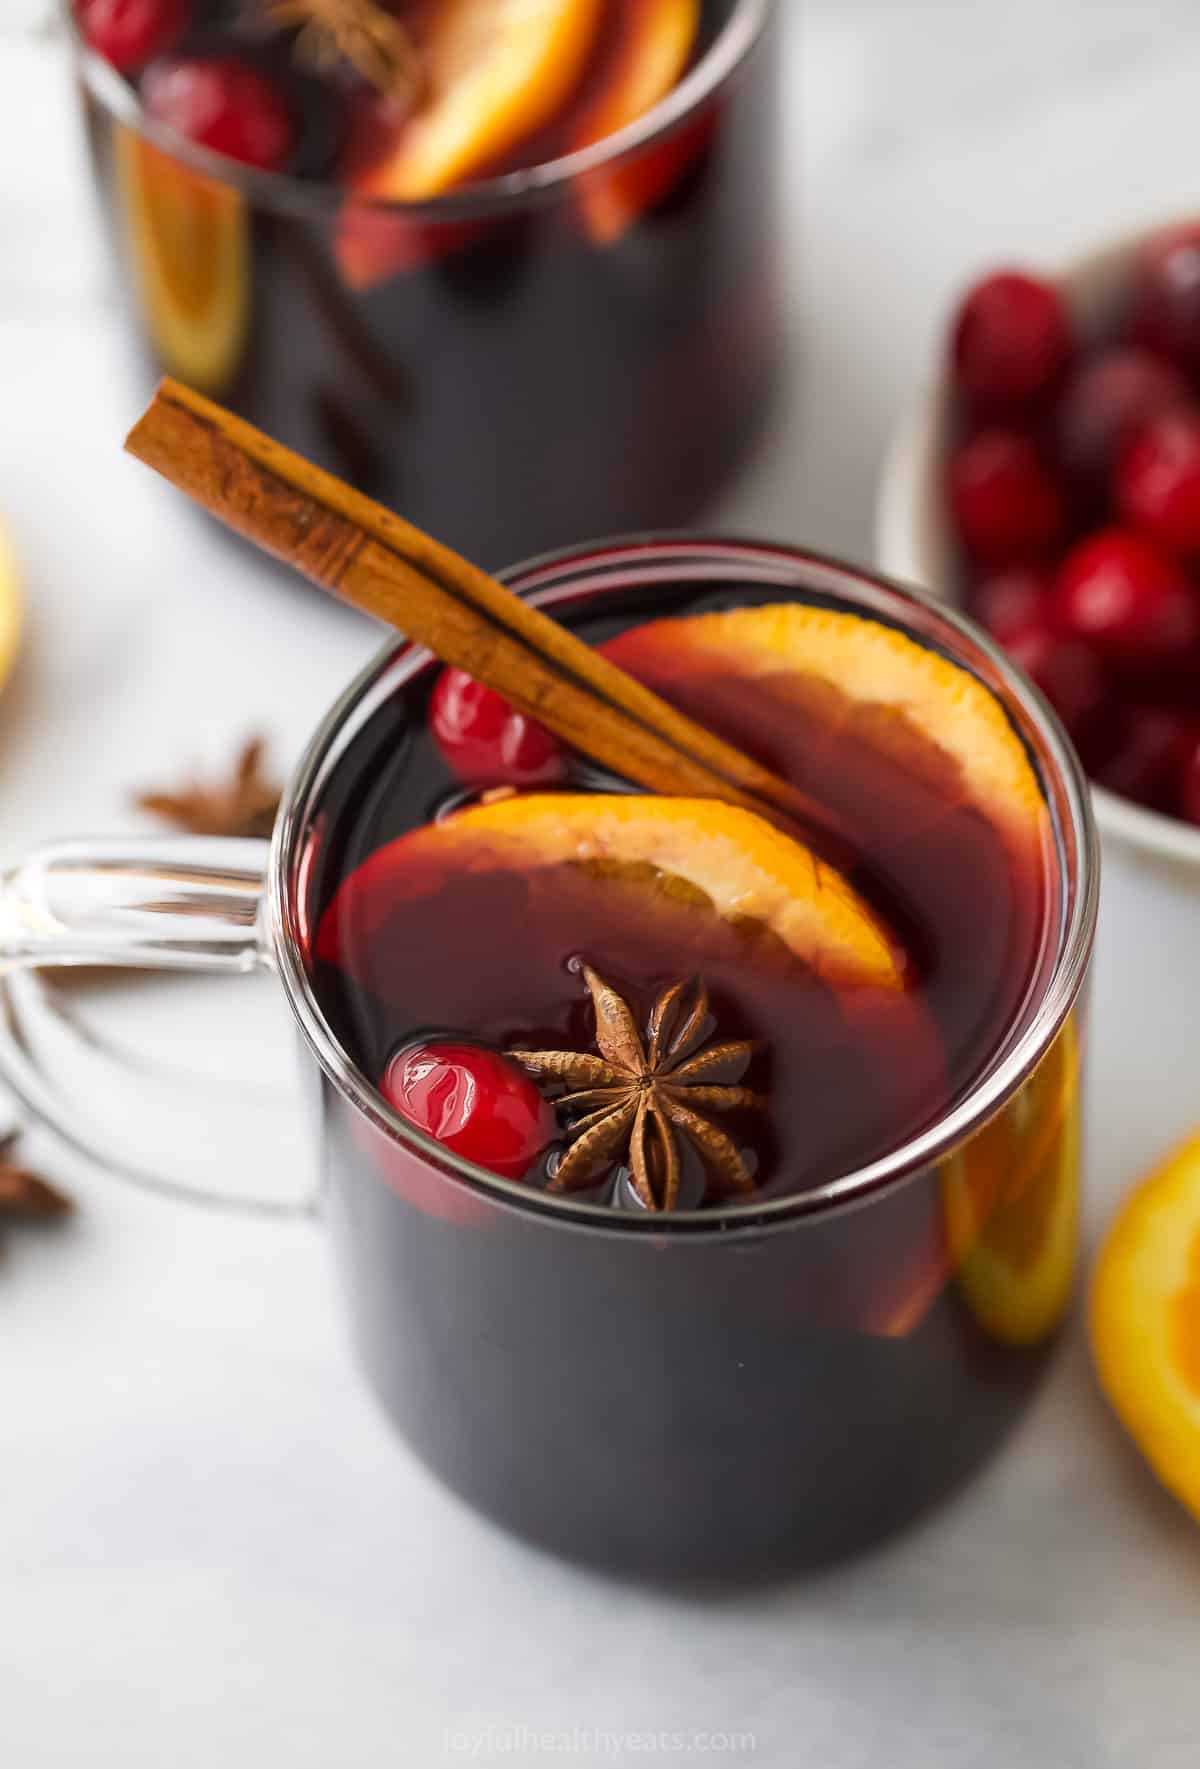 Mulled Wine Kit - Holiday Spiced Wine Mix